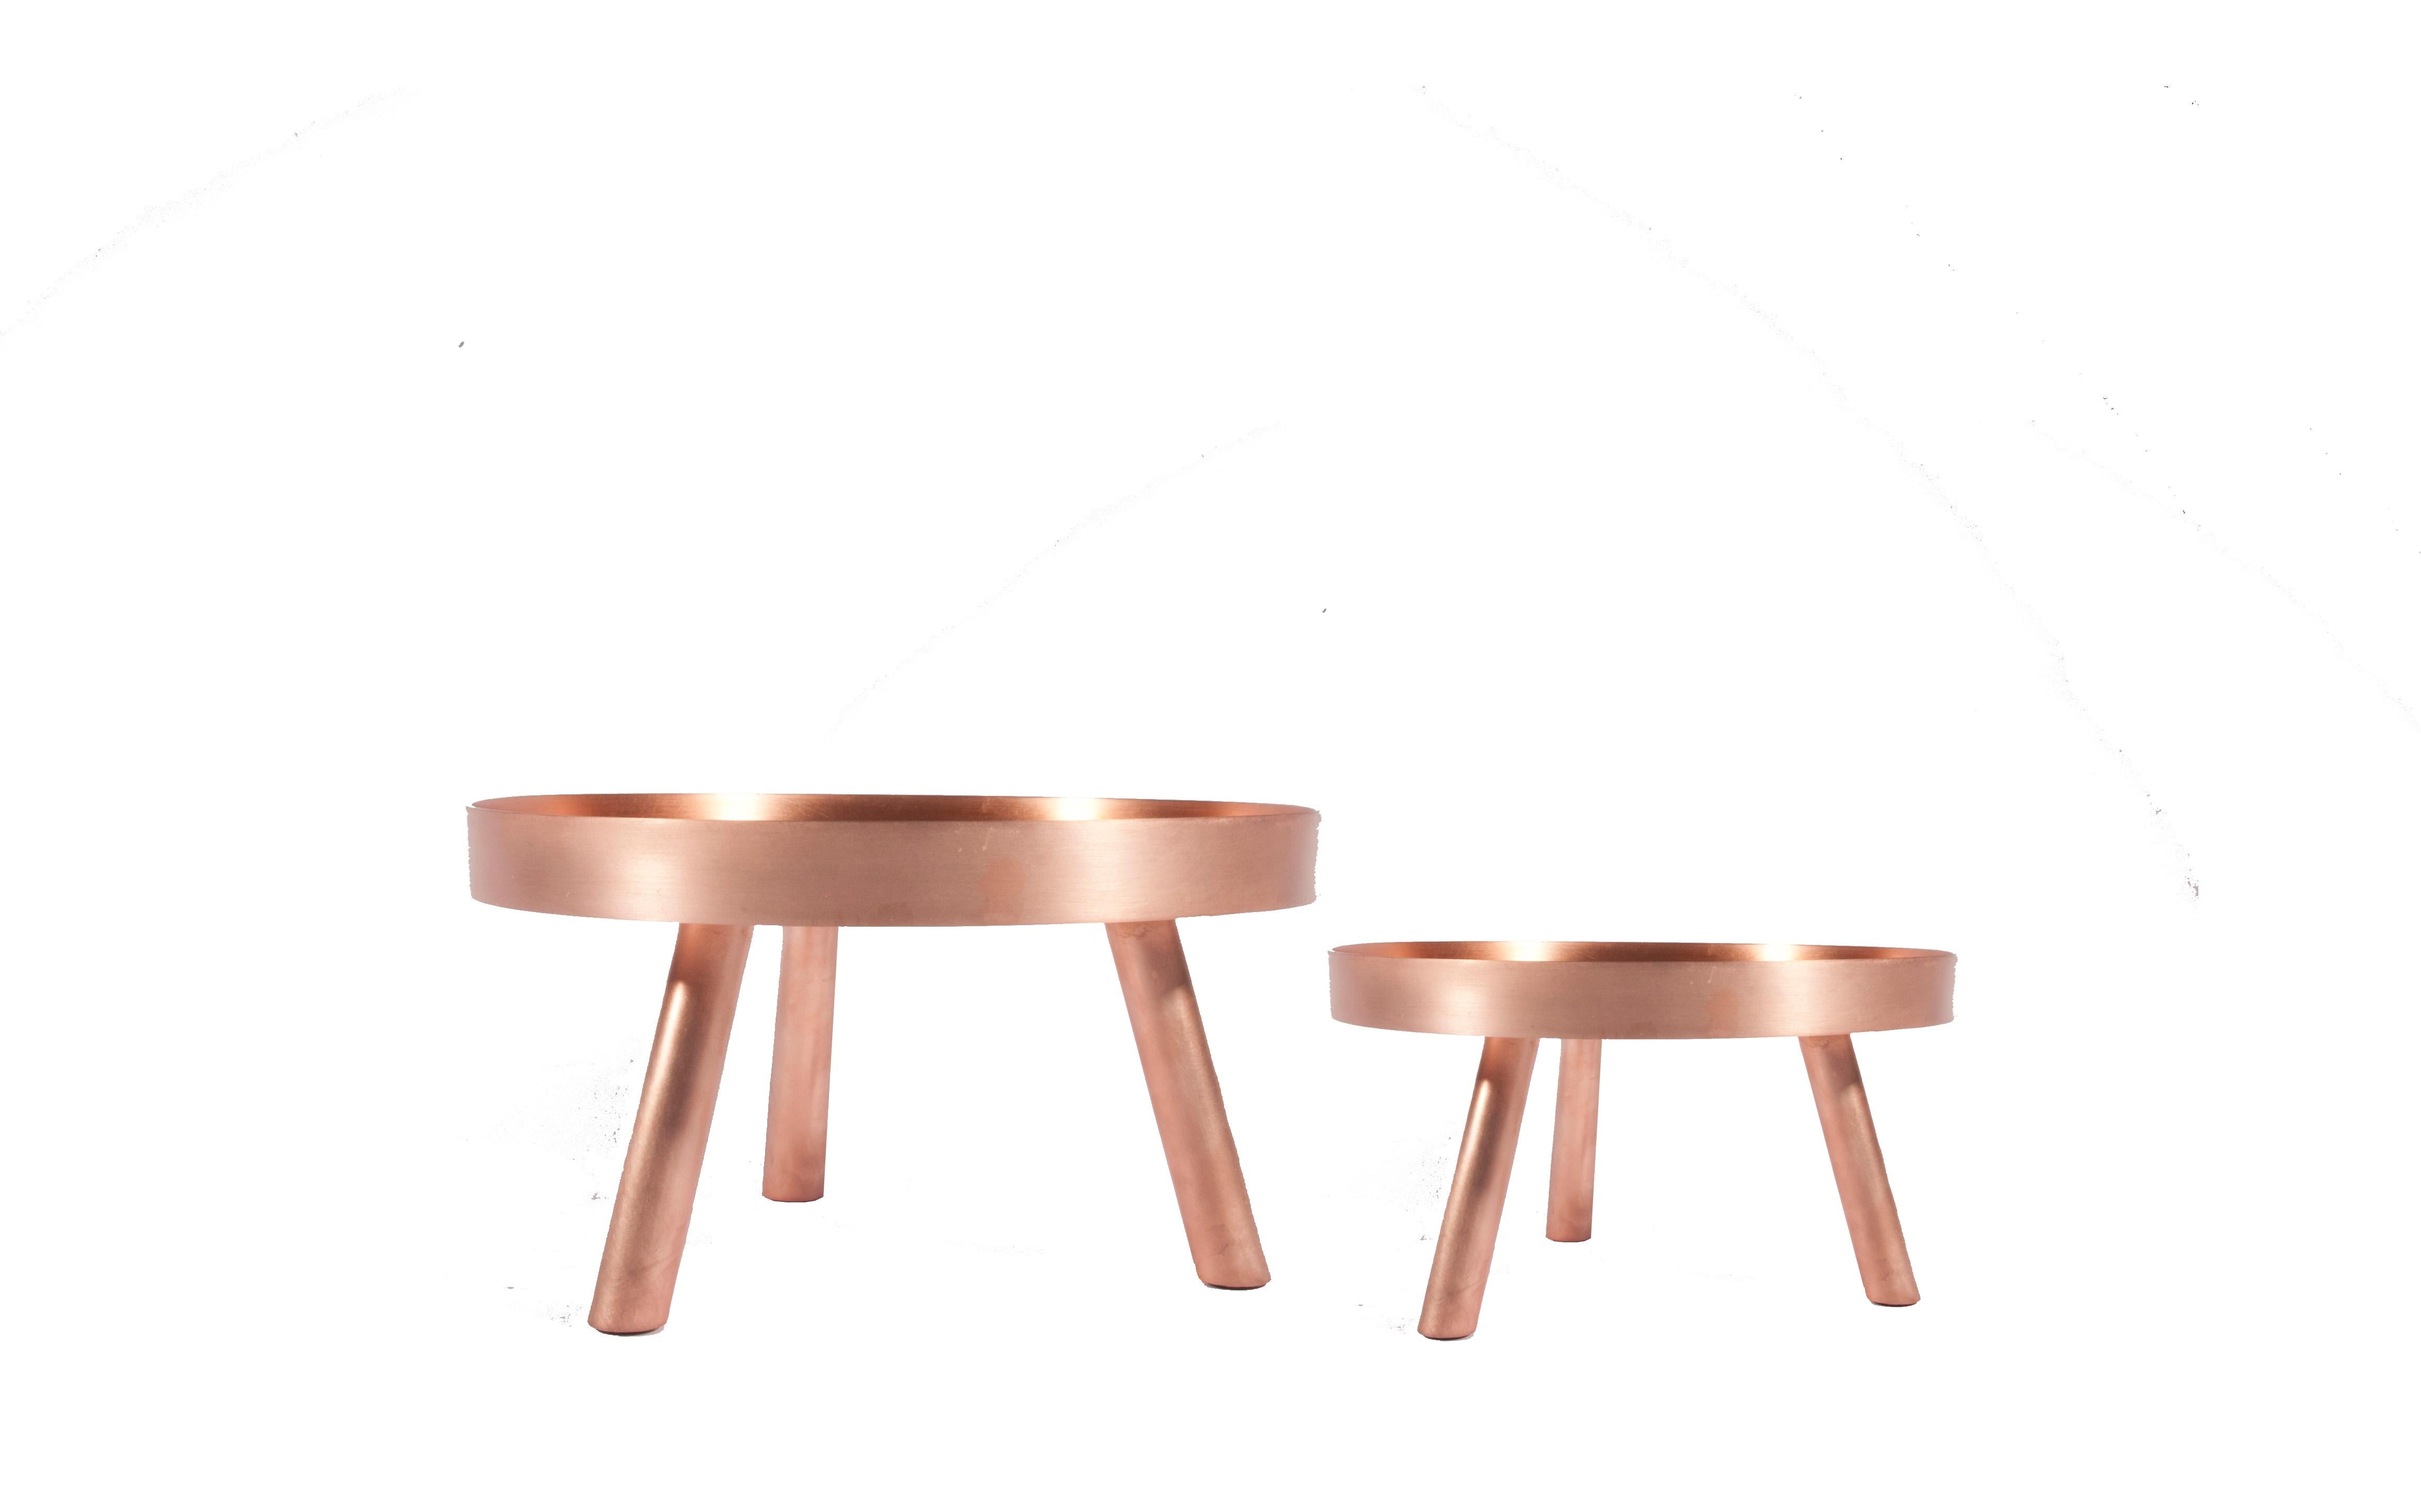 Simple, elegant, minimalist, the contemporary copper small serving tray titled lift, to will redefine the landscape of your table setting. Inspired by the Pantheon in Rome with its powerful oculus and strong minimalist domed ceiling, the life can be